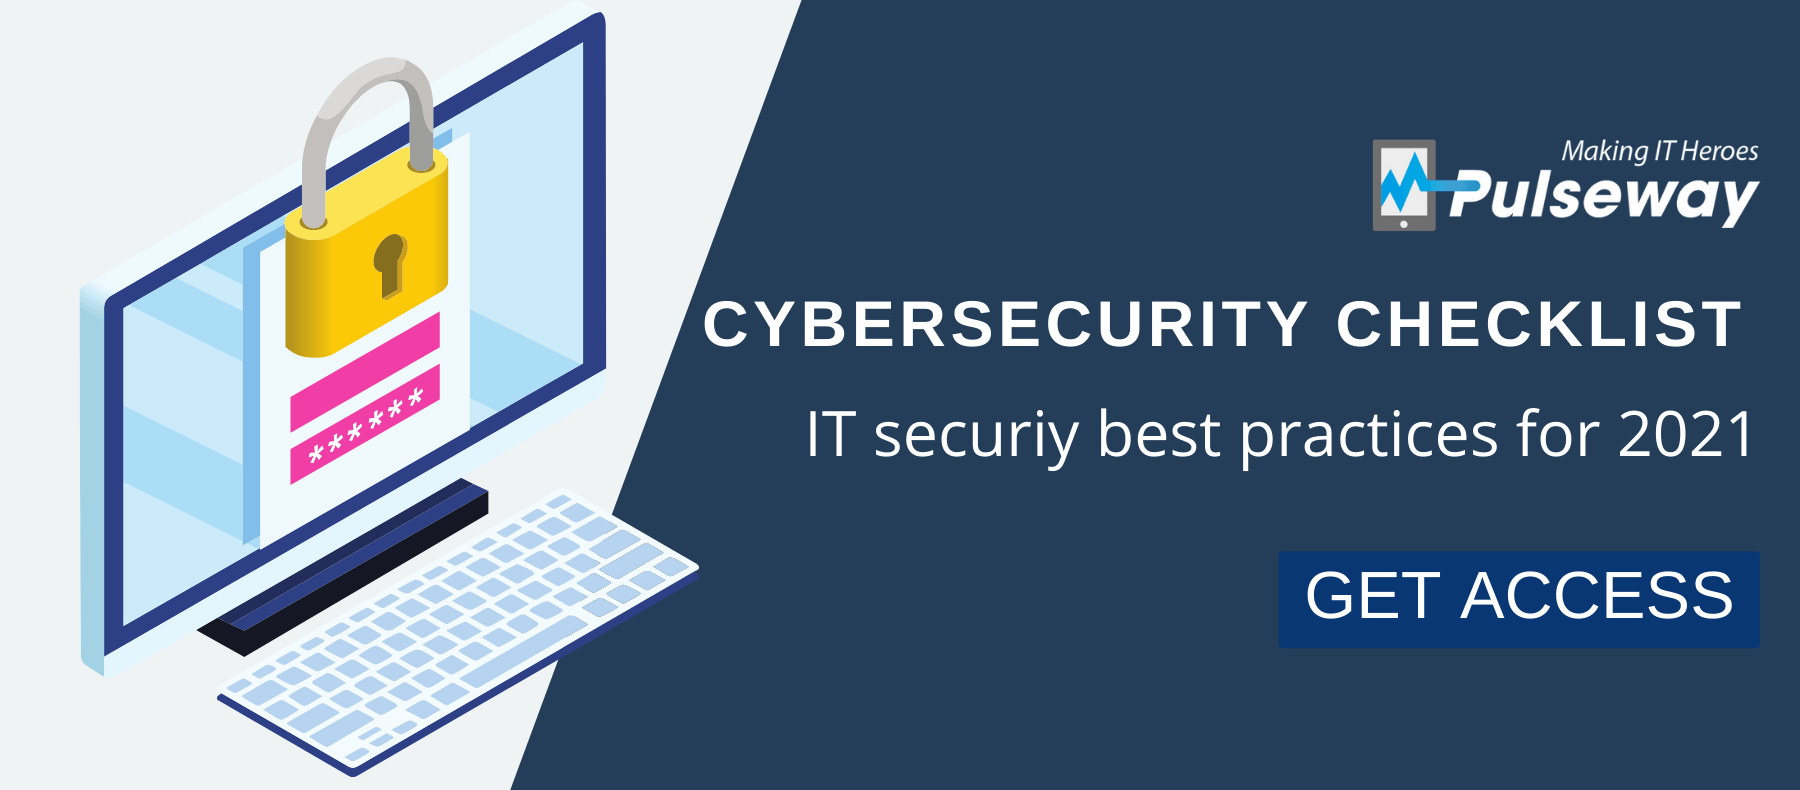 Cybersecurity Checklist: Security Best Practices 2021